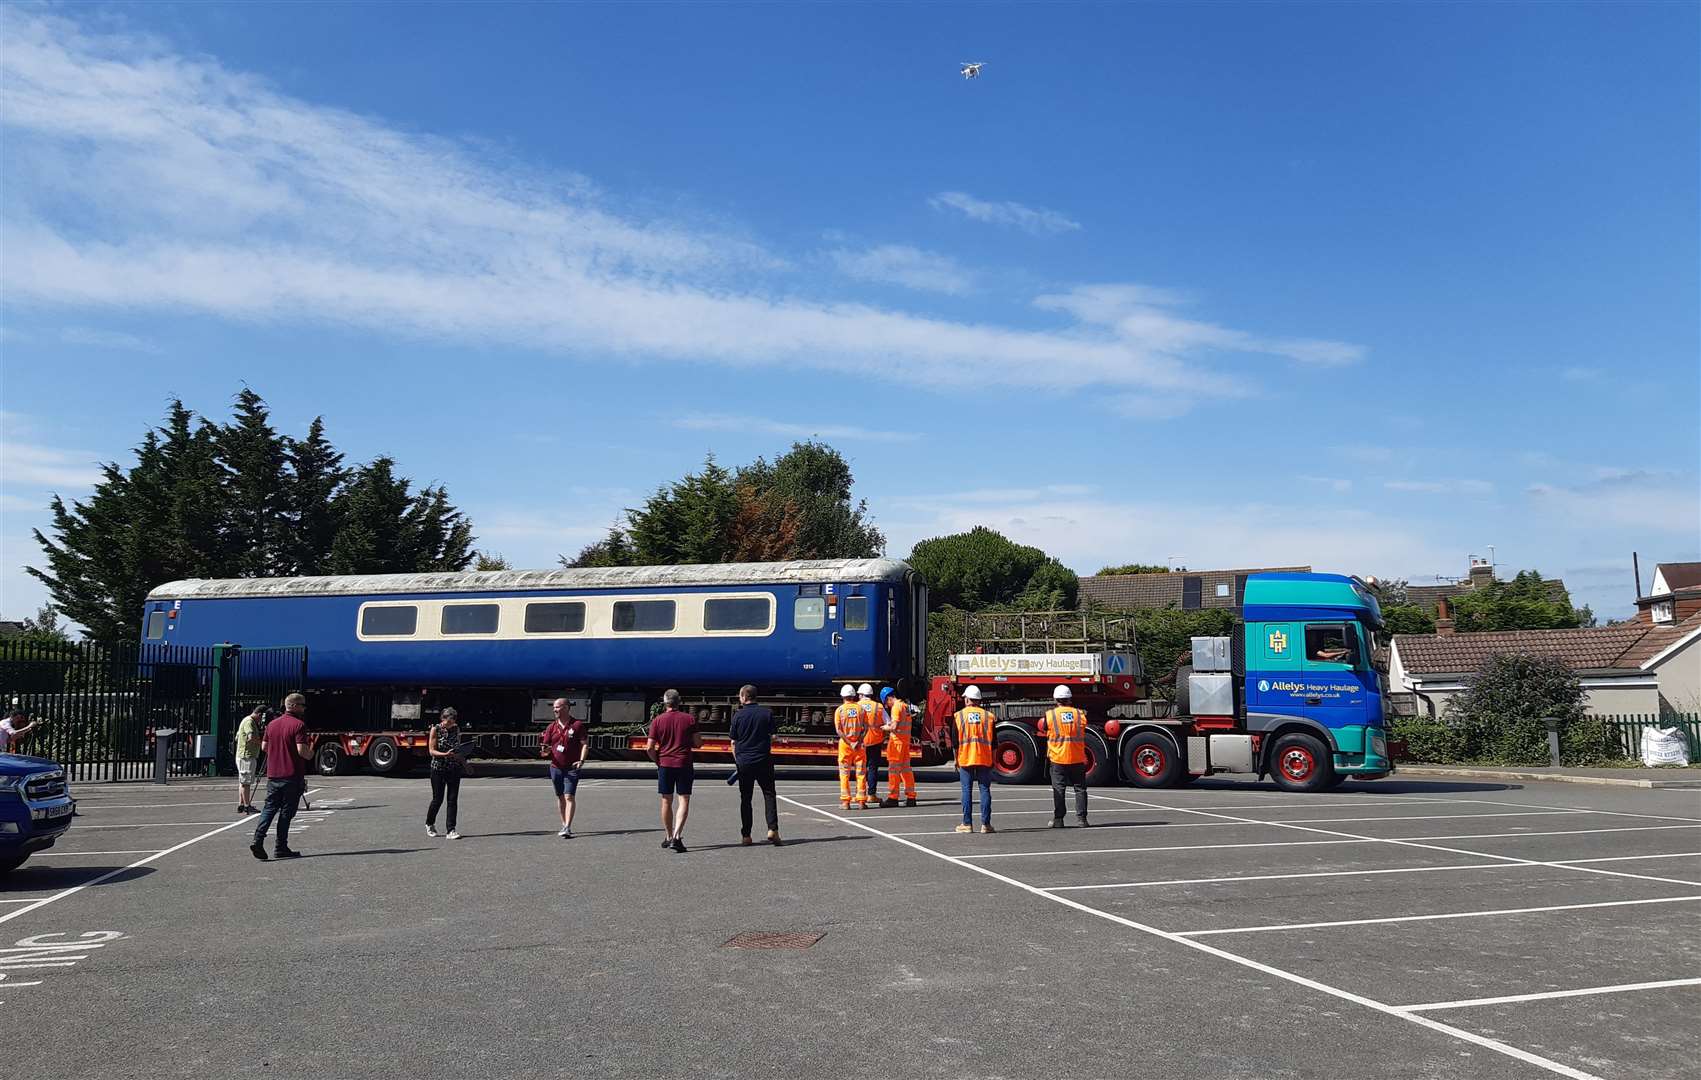 The 25-tonne train was transported and craned into place at the school in August last year